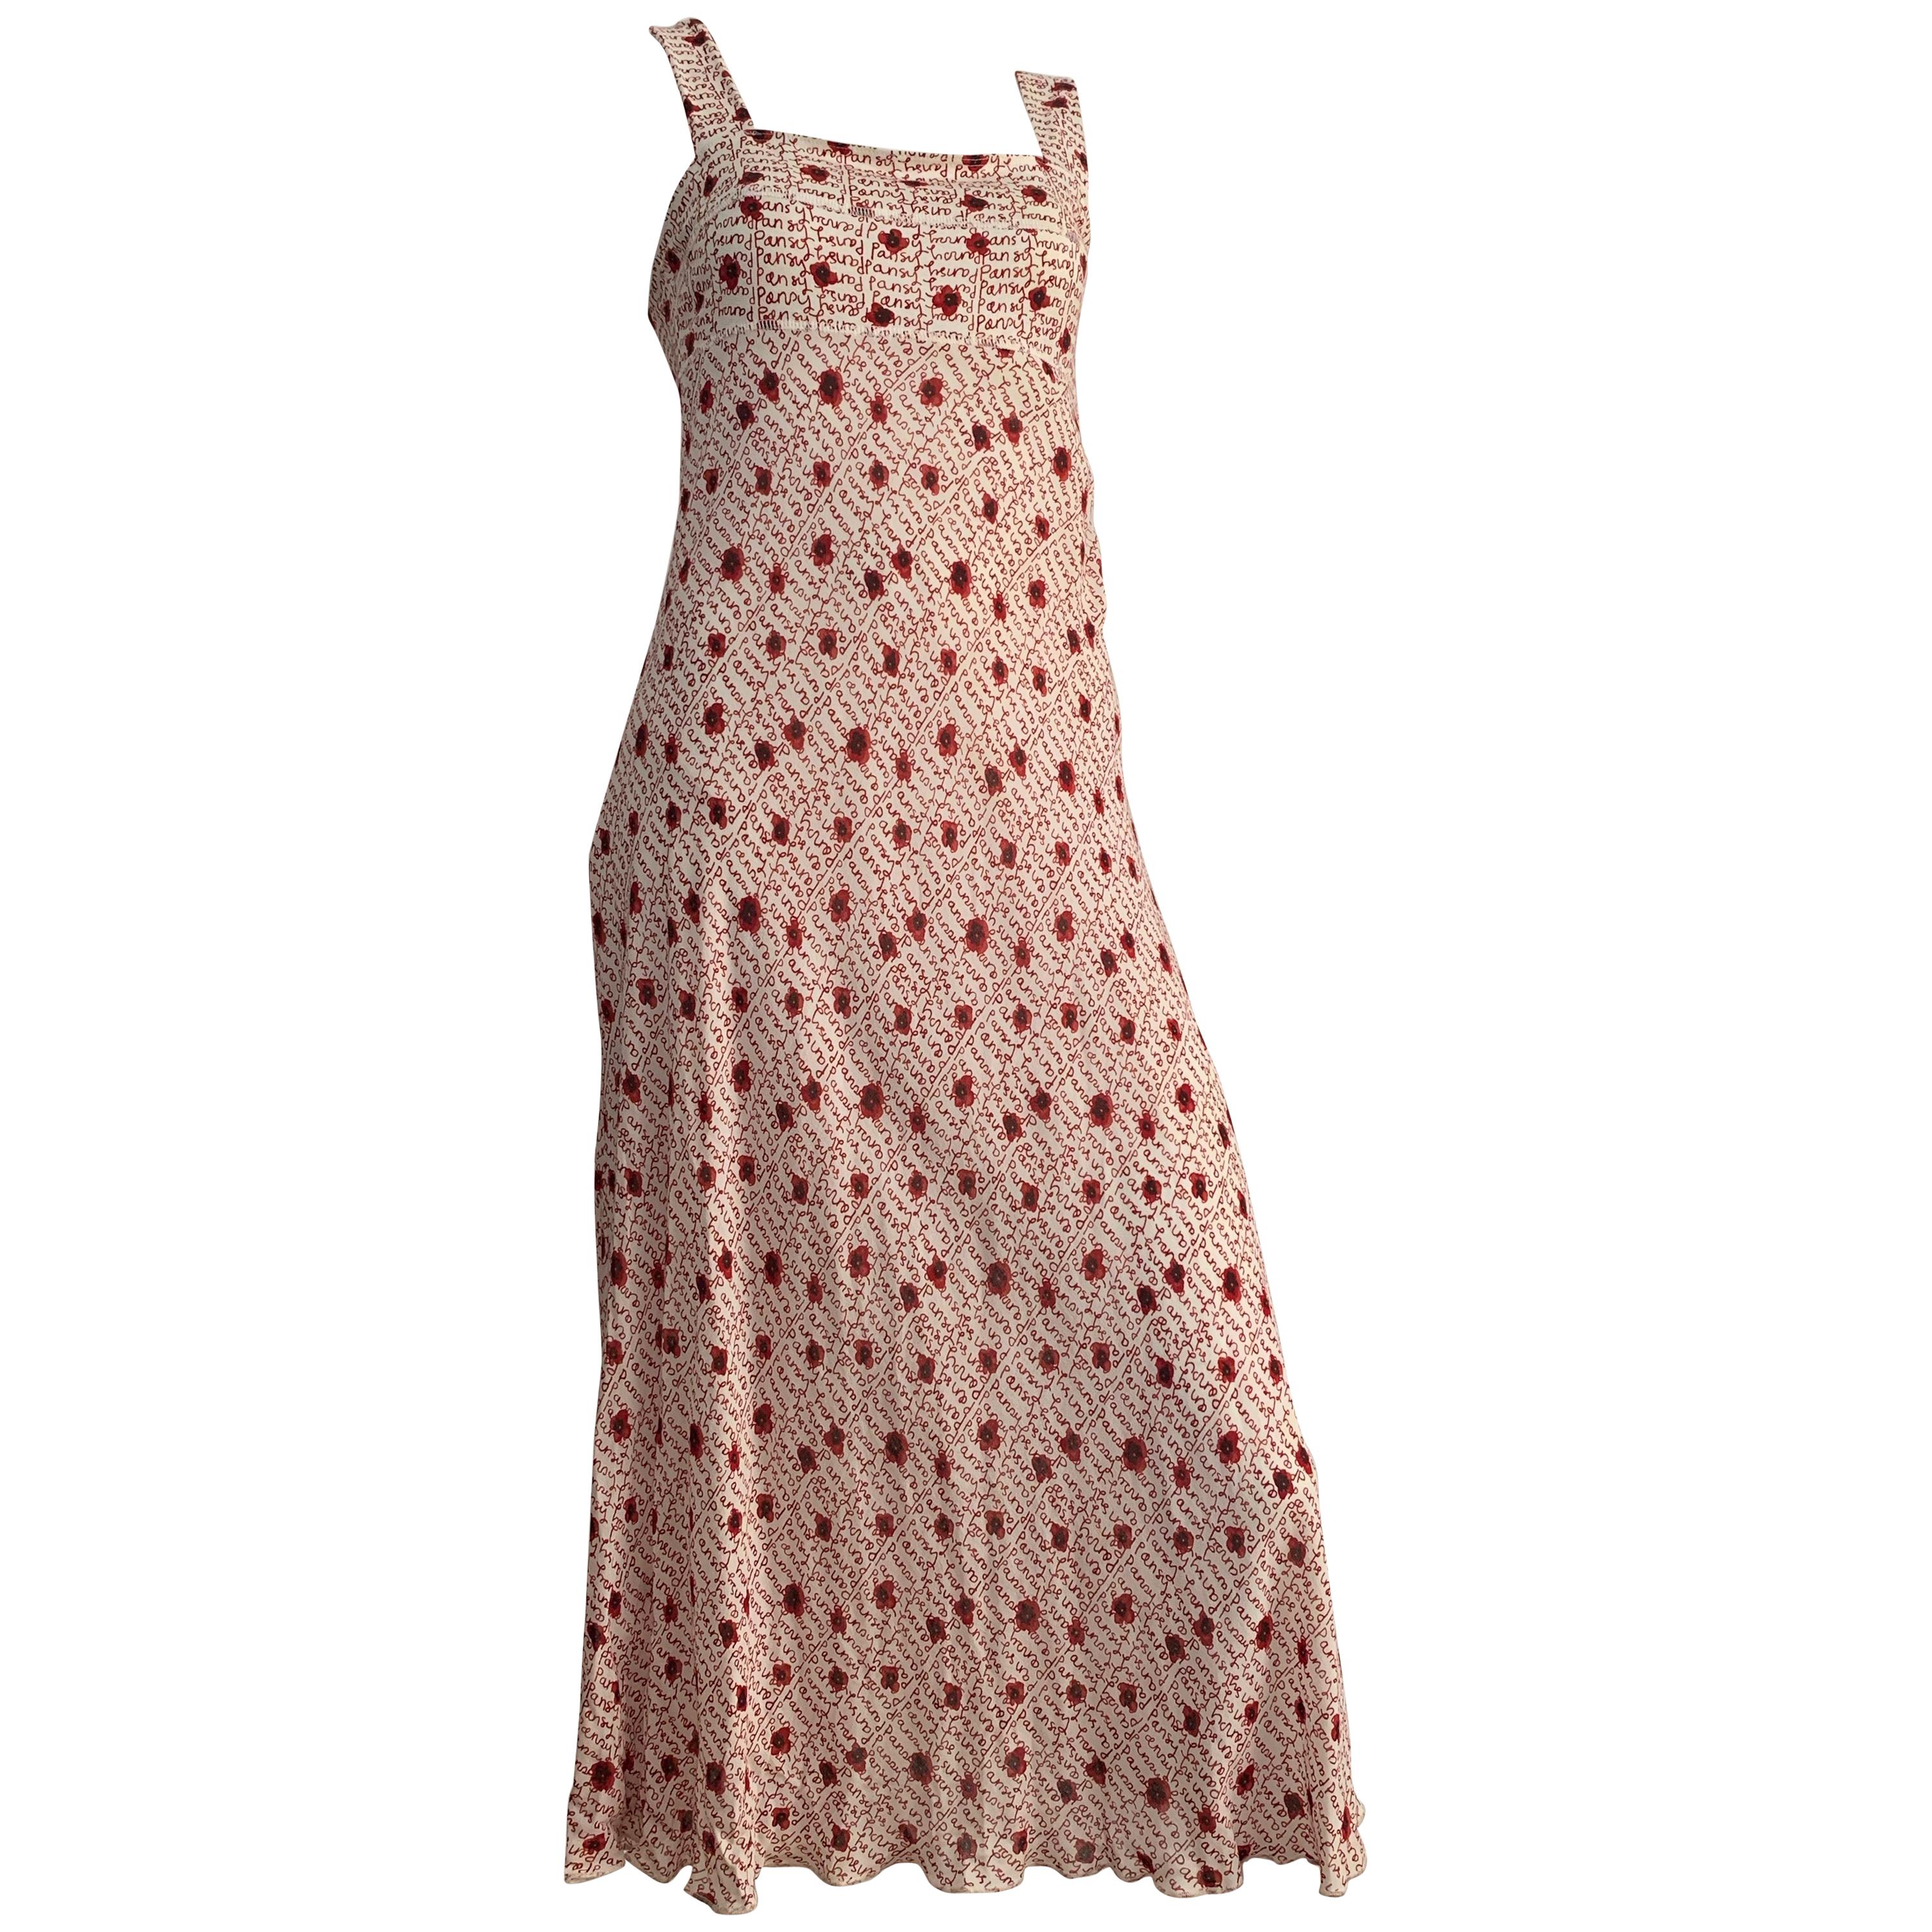 Sonia Rykiel Inscription 1989 Pansy Casual Day Dress Size 4. For Sale